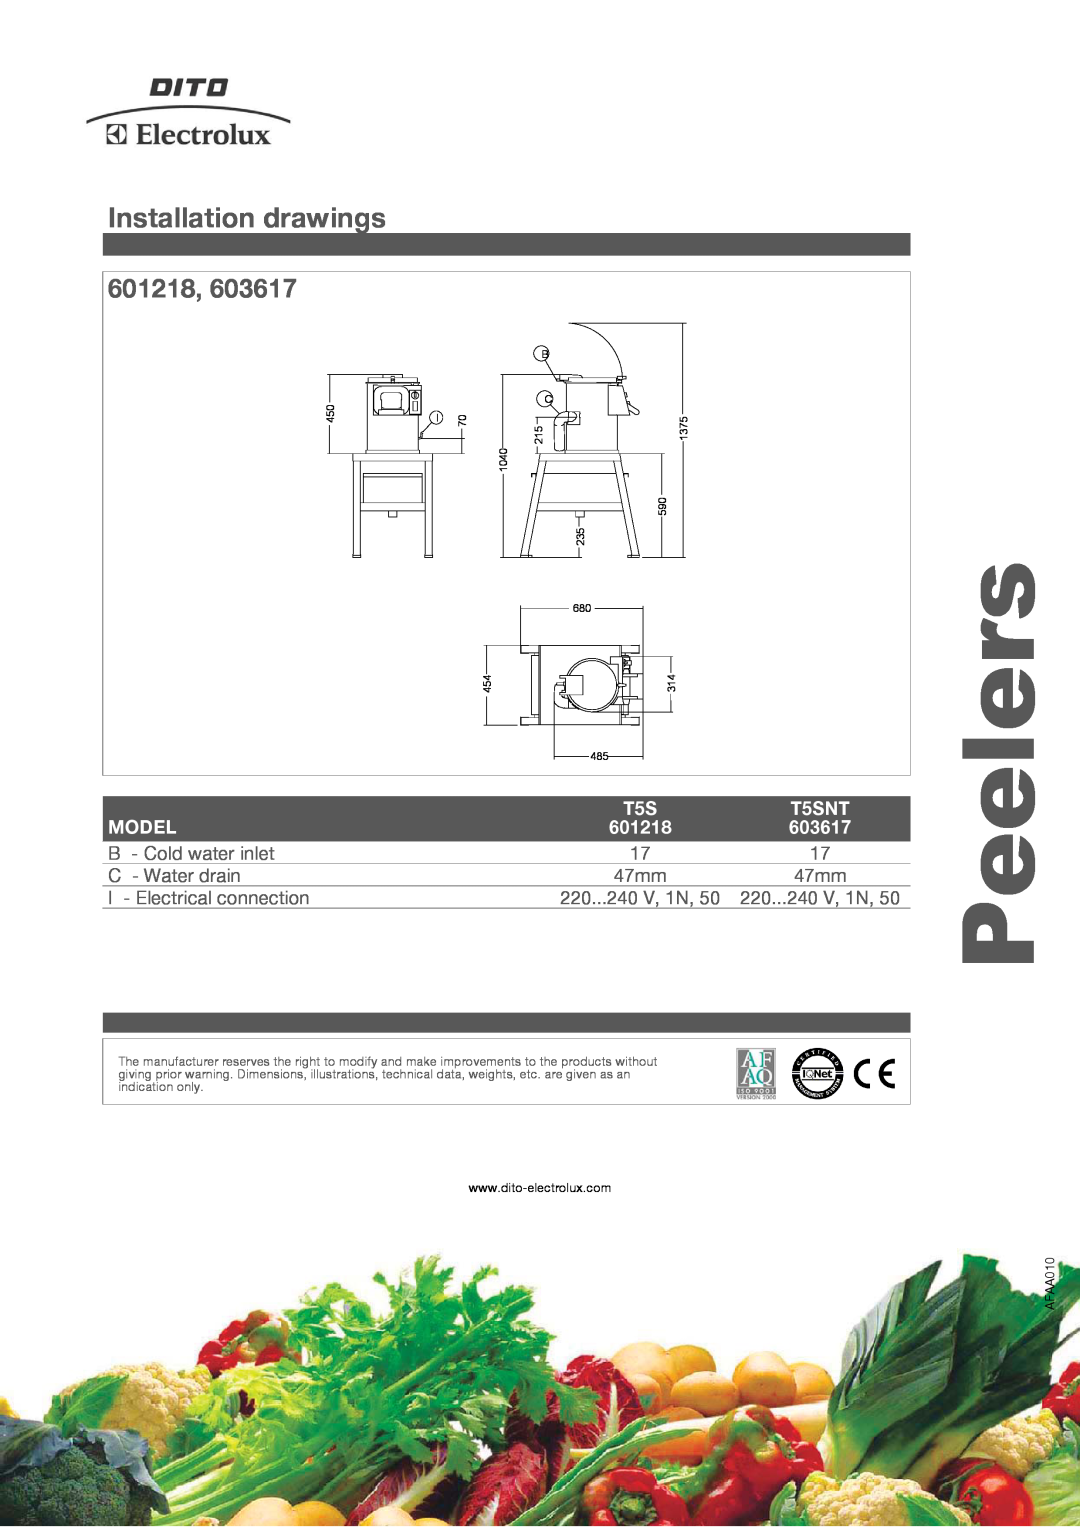 Electrolux 603617 manual Installation drawings, 601218, Peelers, Model, T5SNT, 47mm, Electrical connection, 220...240 V, 1N 